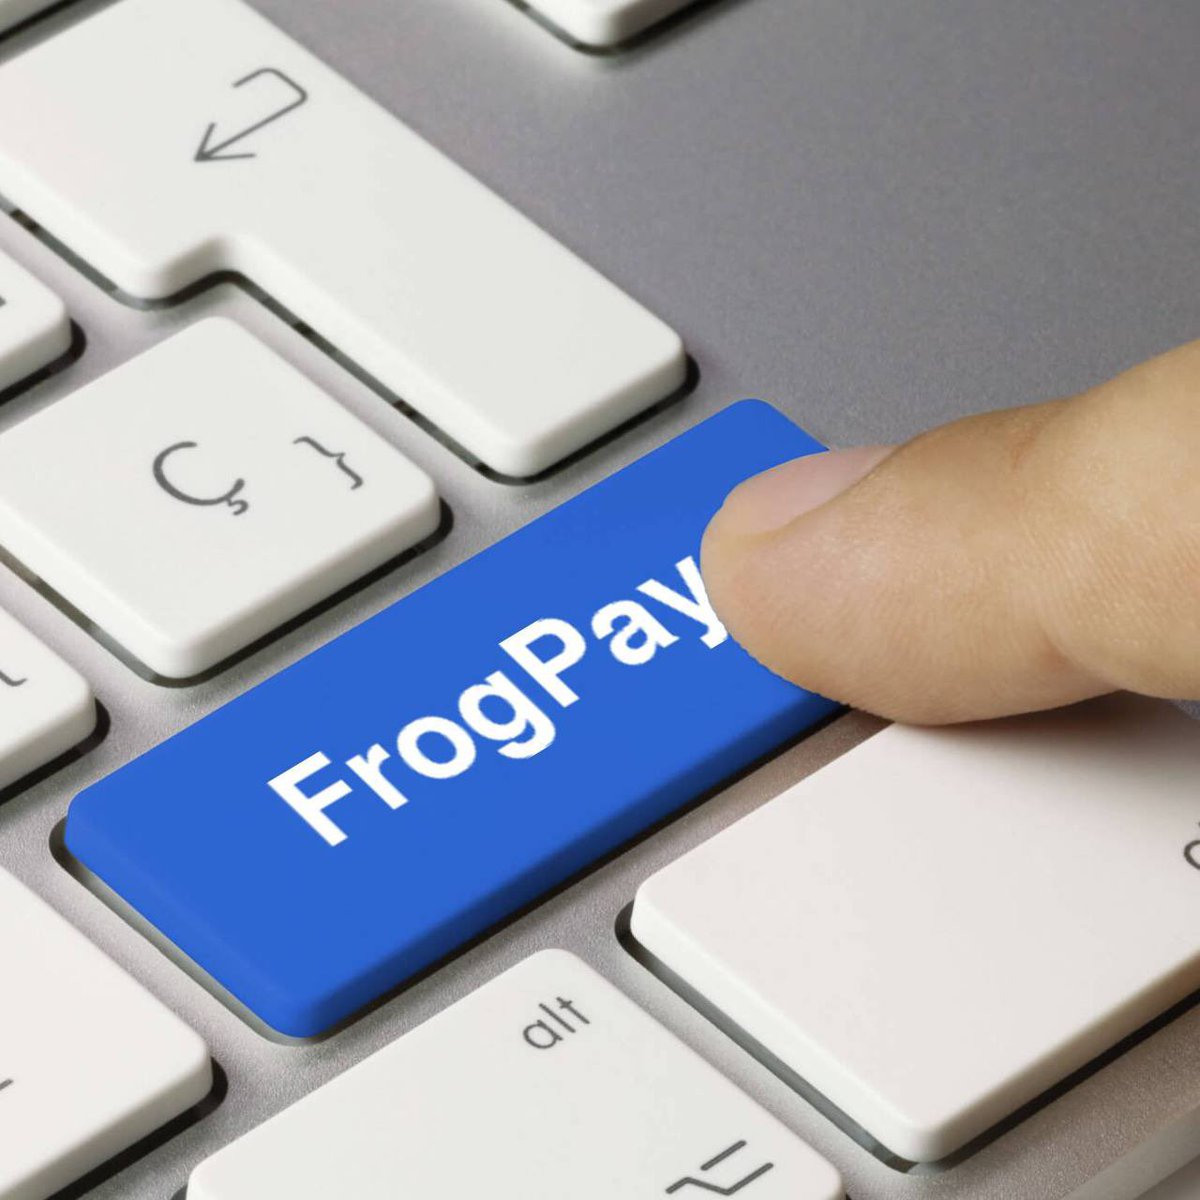 📣 @FrogPayAI is the World-First Decentralized Charge-Back on Blockchain.

🔗 Thanks to FrogPay, for the first time since Bitcoin was created, payments will be secure and anyone can access a refund option, thanks to their new, fair & decentralized dispute resolution technology.